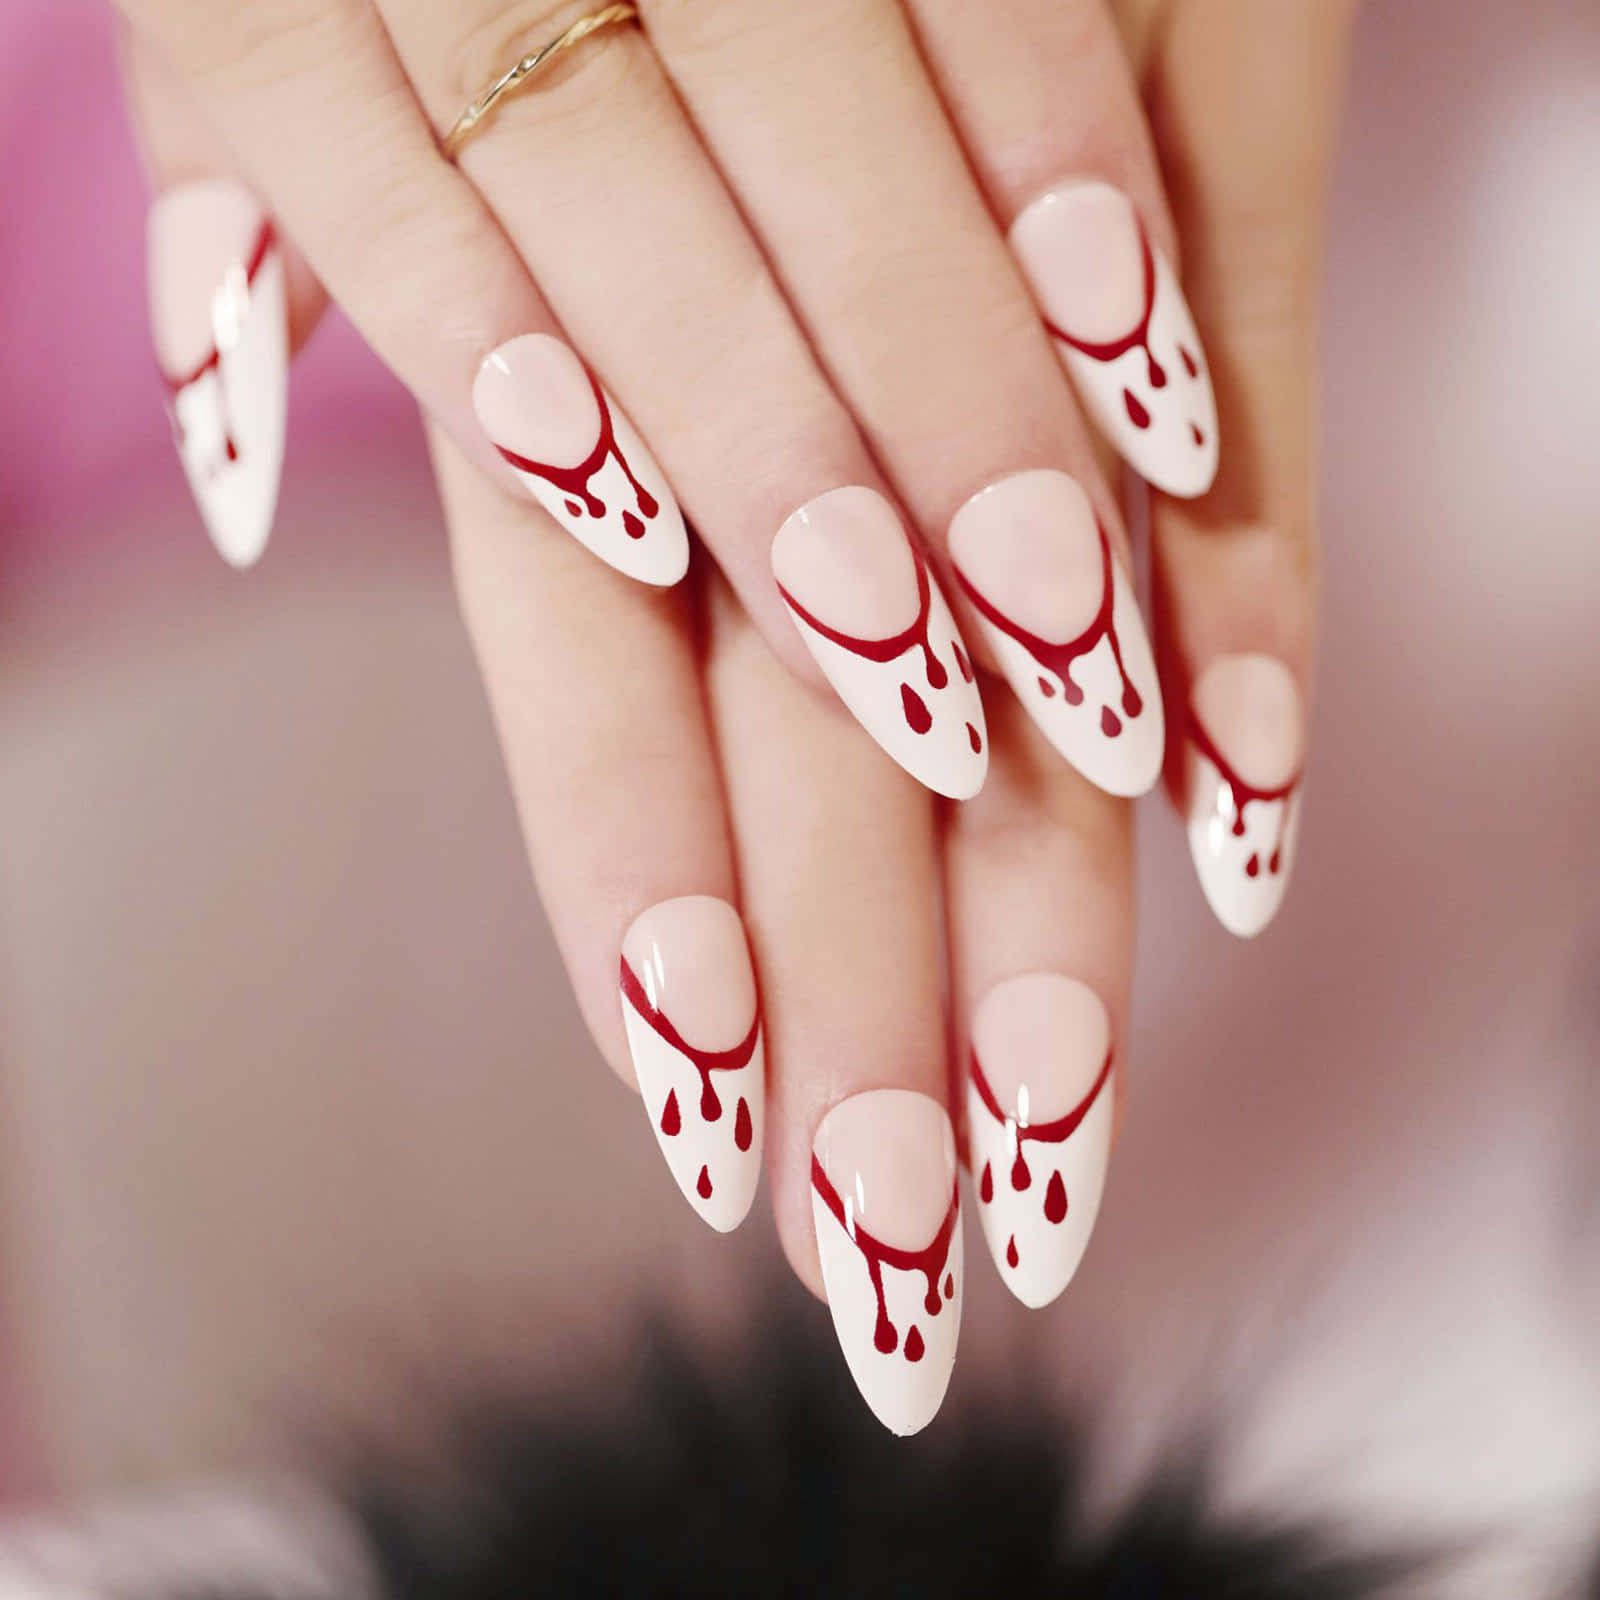 Enjoy the spooky season with this iconic Halloween-inspired nail art!" Wallpaper